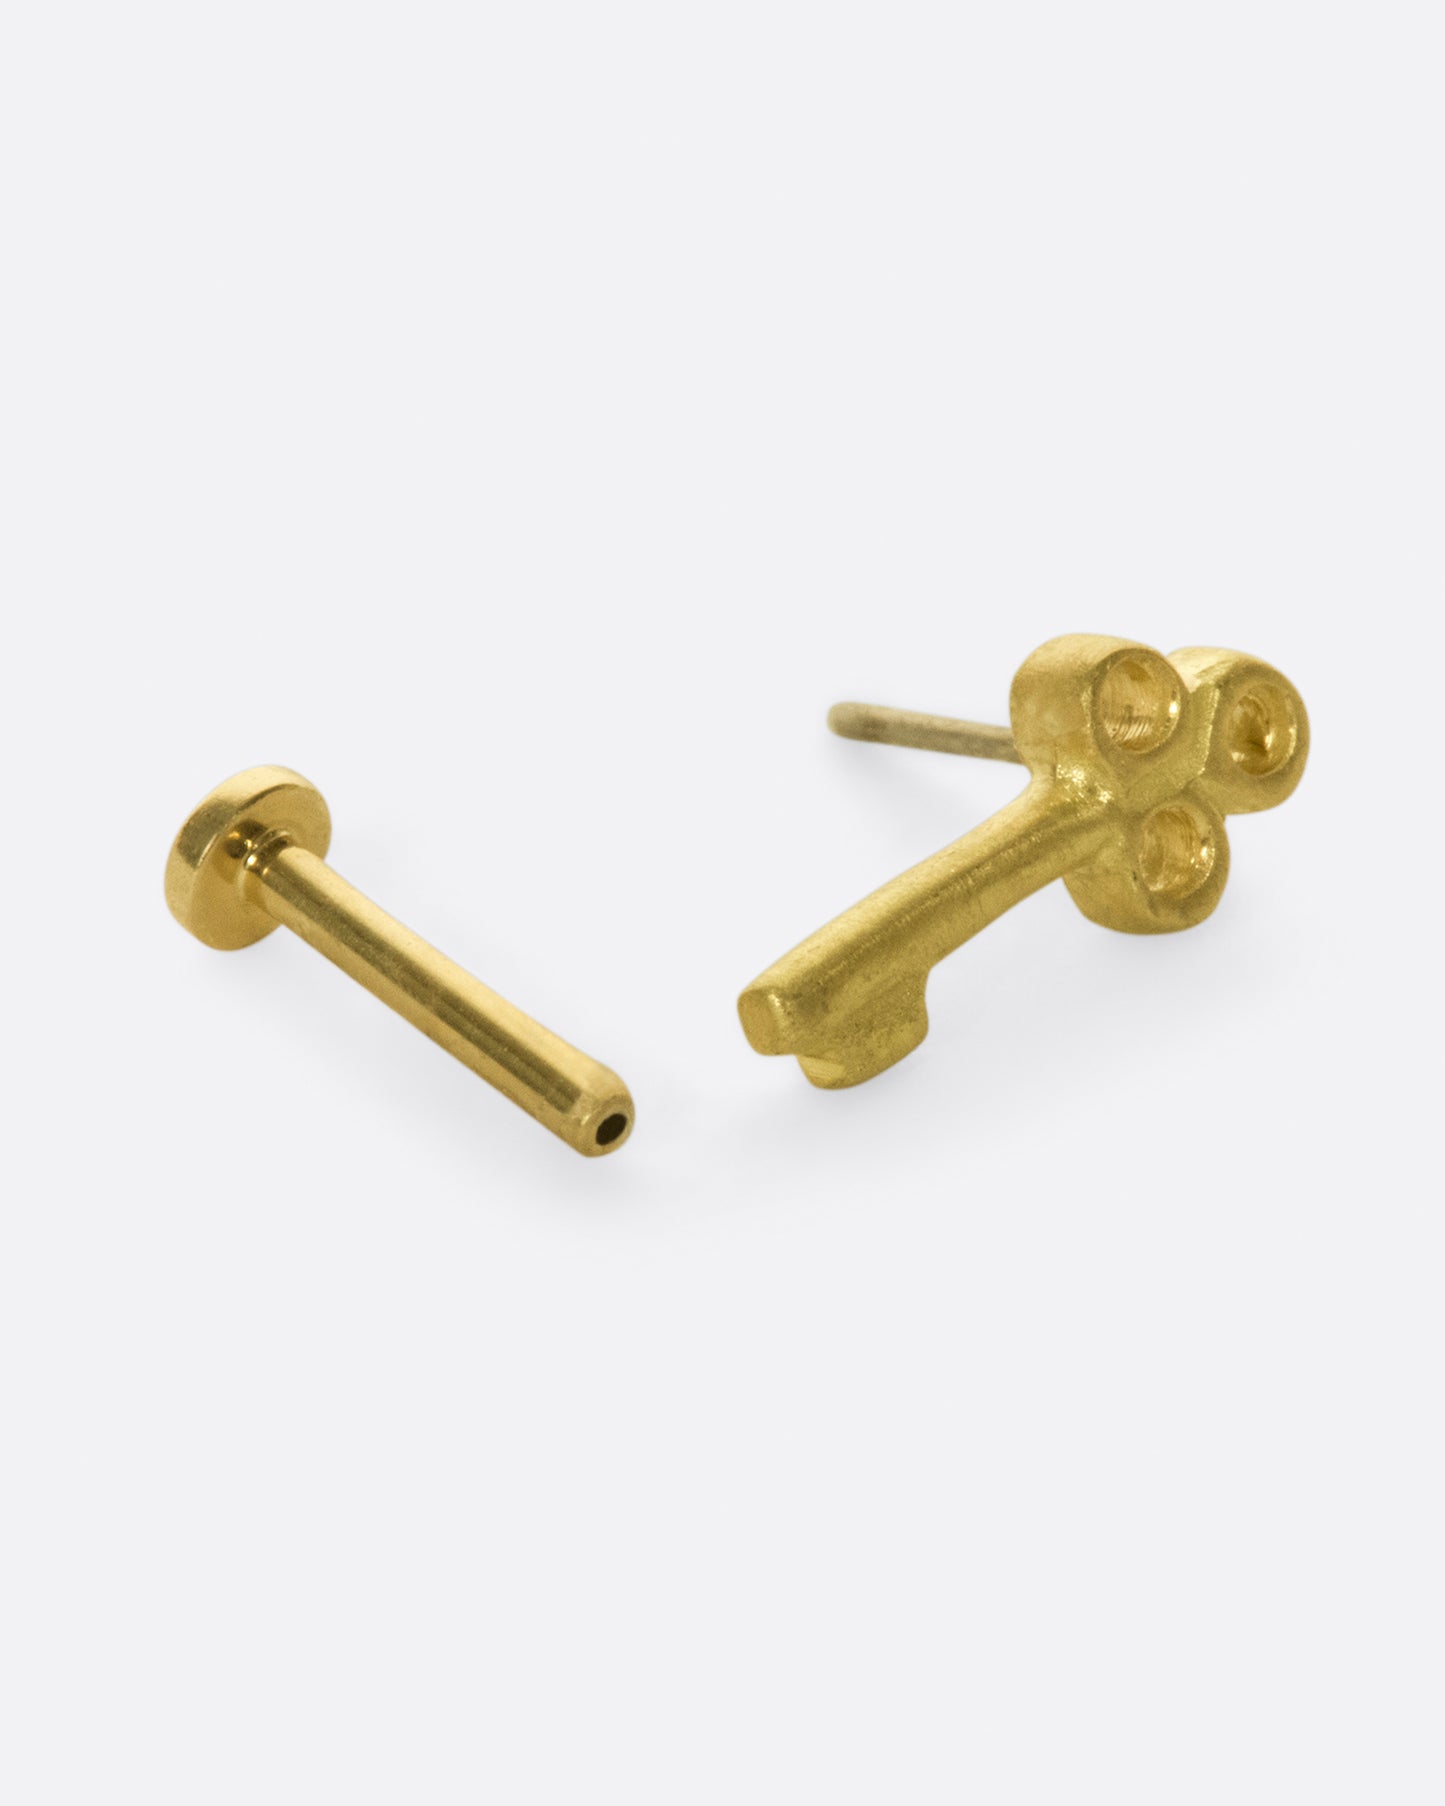 A tiny, matte gold key to adorn your ear.